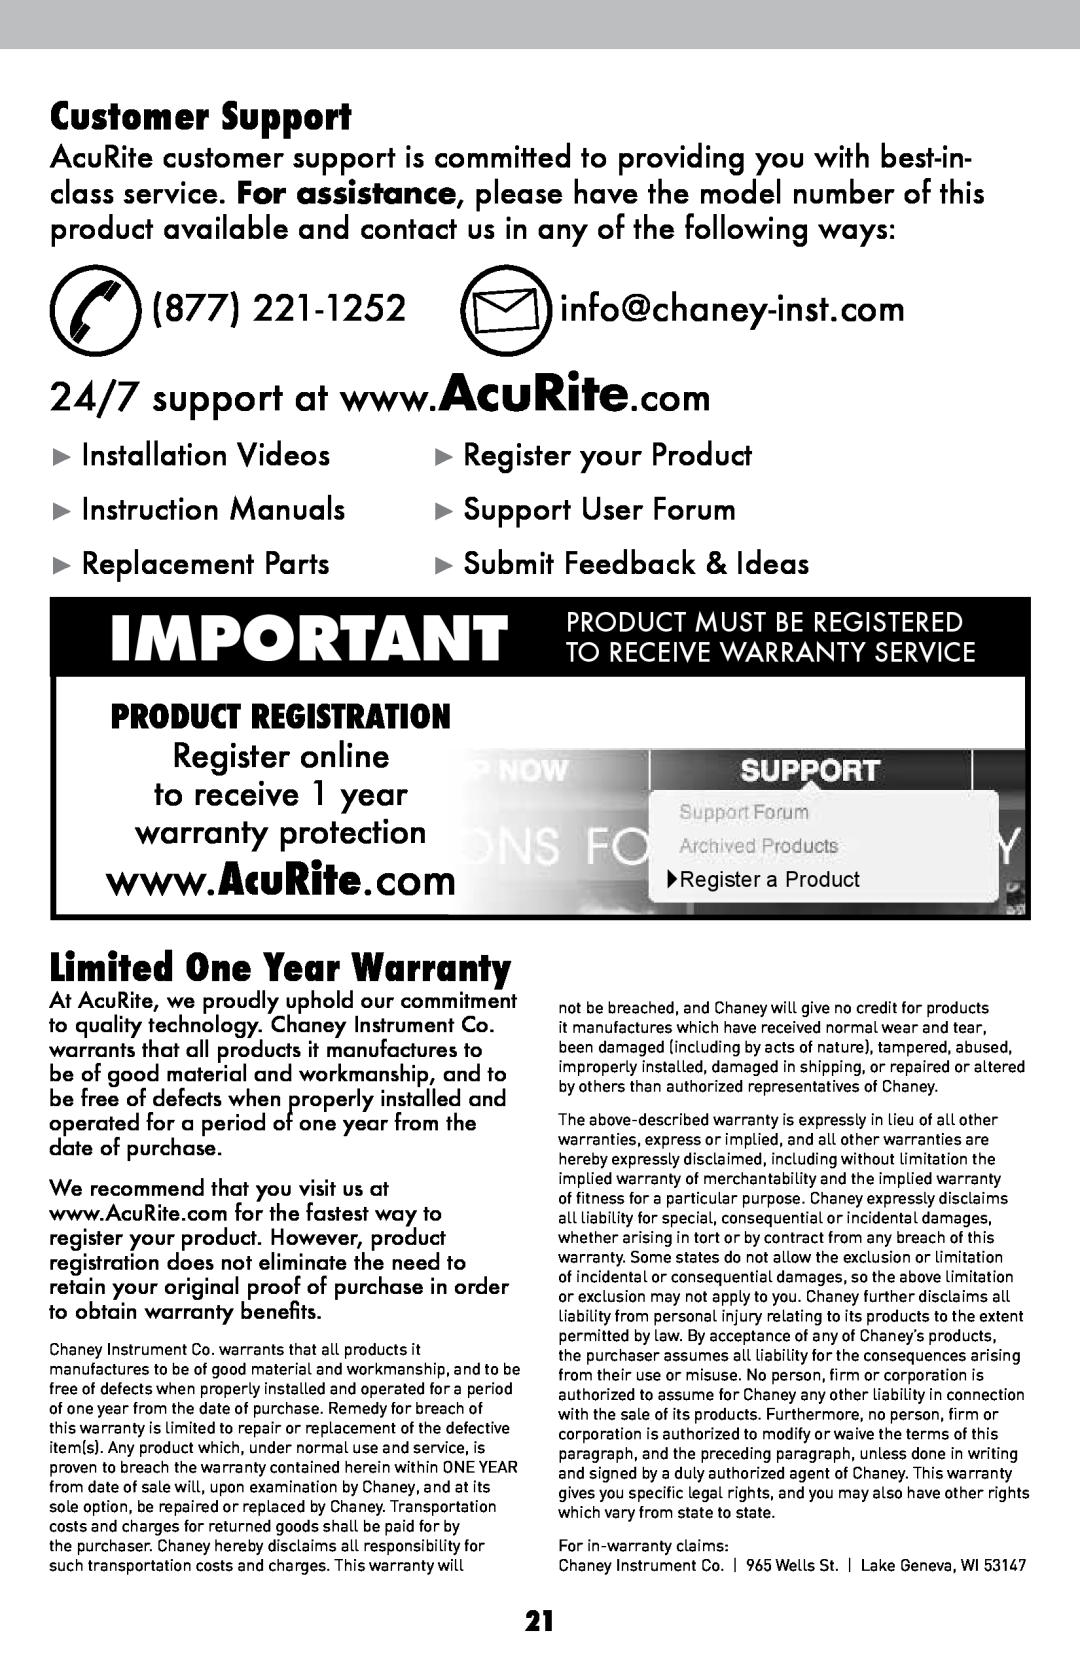 Acu-Rite 1010 Customer Support, Limited One Year Warranty, 877 221-1252 info@chaney-inst.com, Register online 